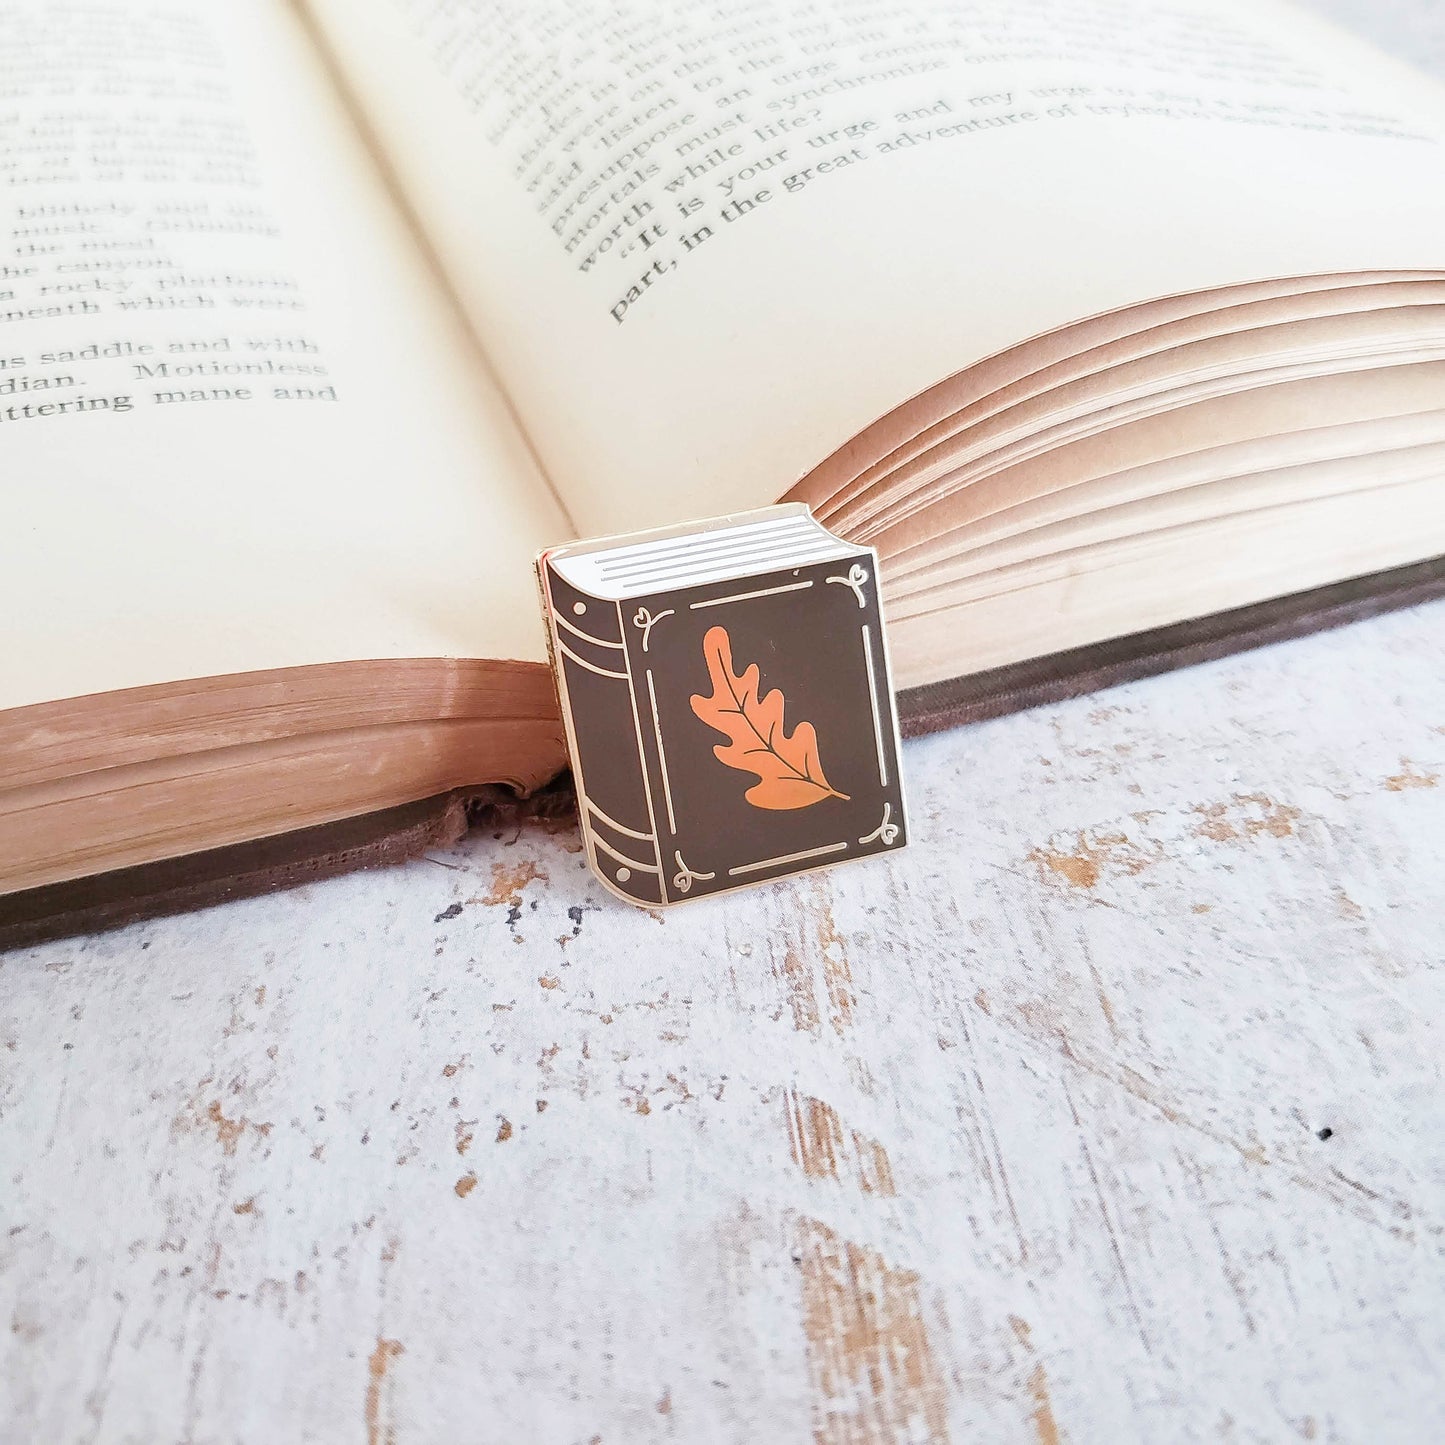 Chocolate brown book with small orange leaf enamel pin resting on a book